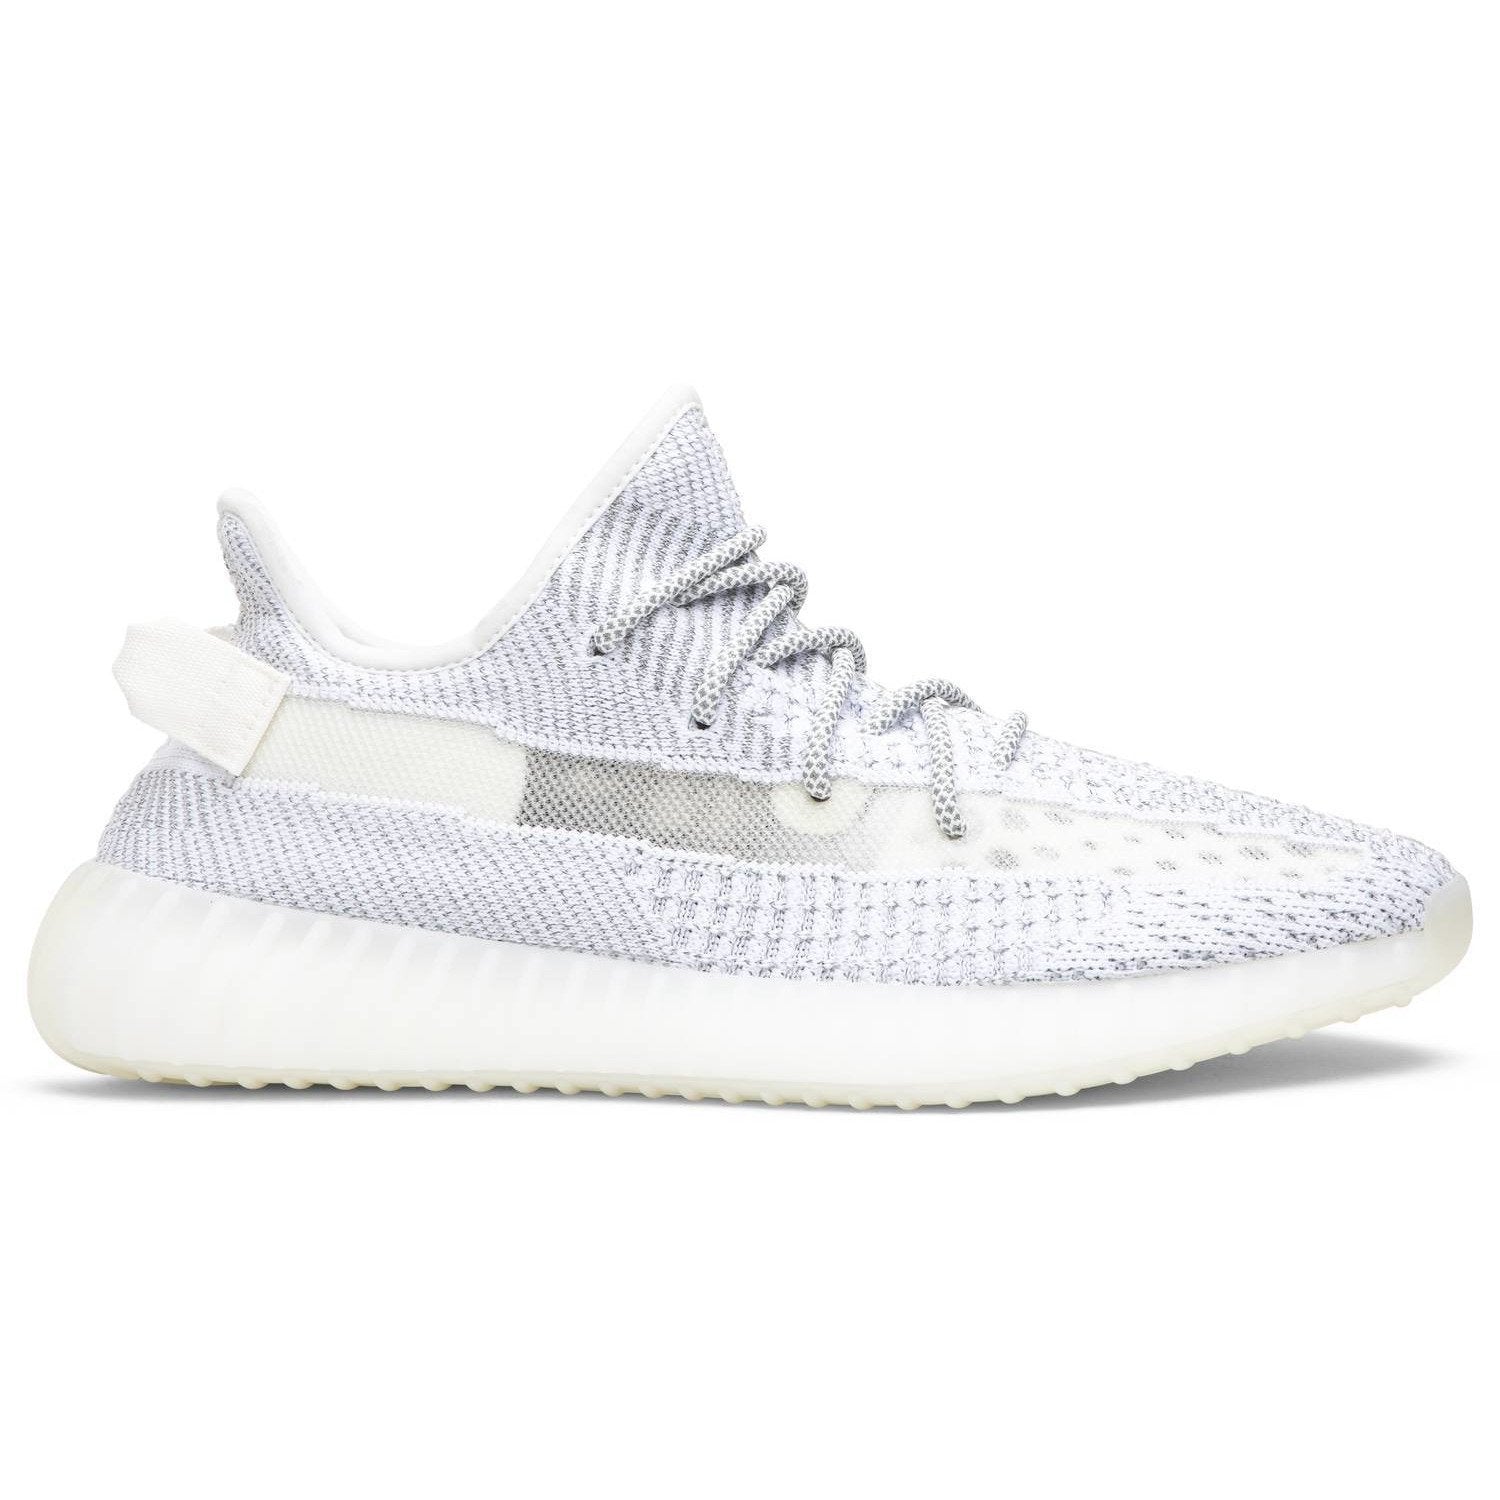 adidas Yeezy Boost 350 V2 'Static Reflective' - After Burn